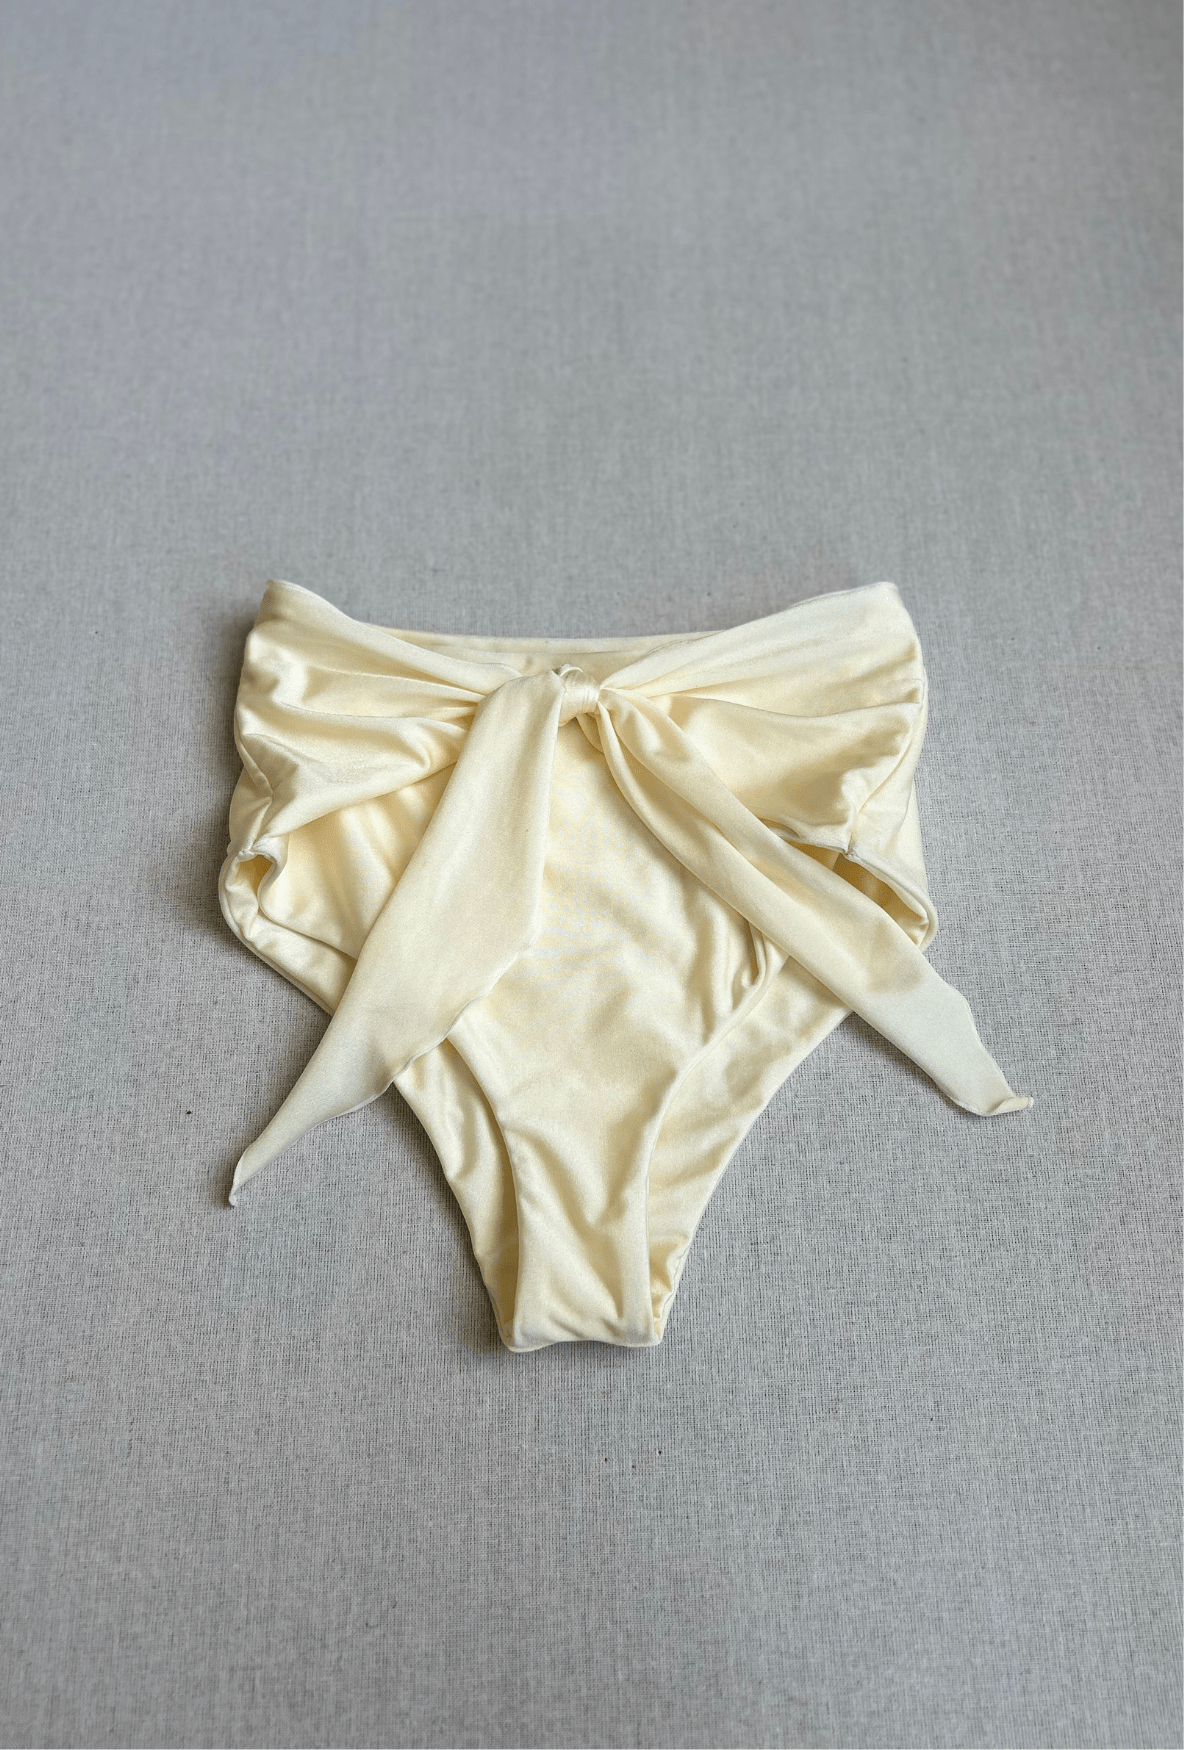 The Brooke Bottom in Ivory Shine size small